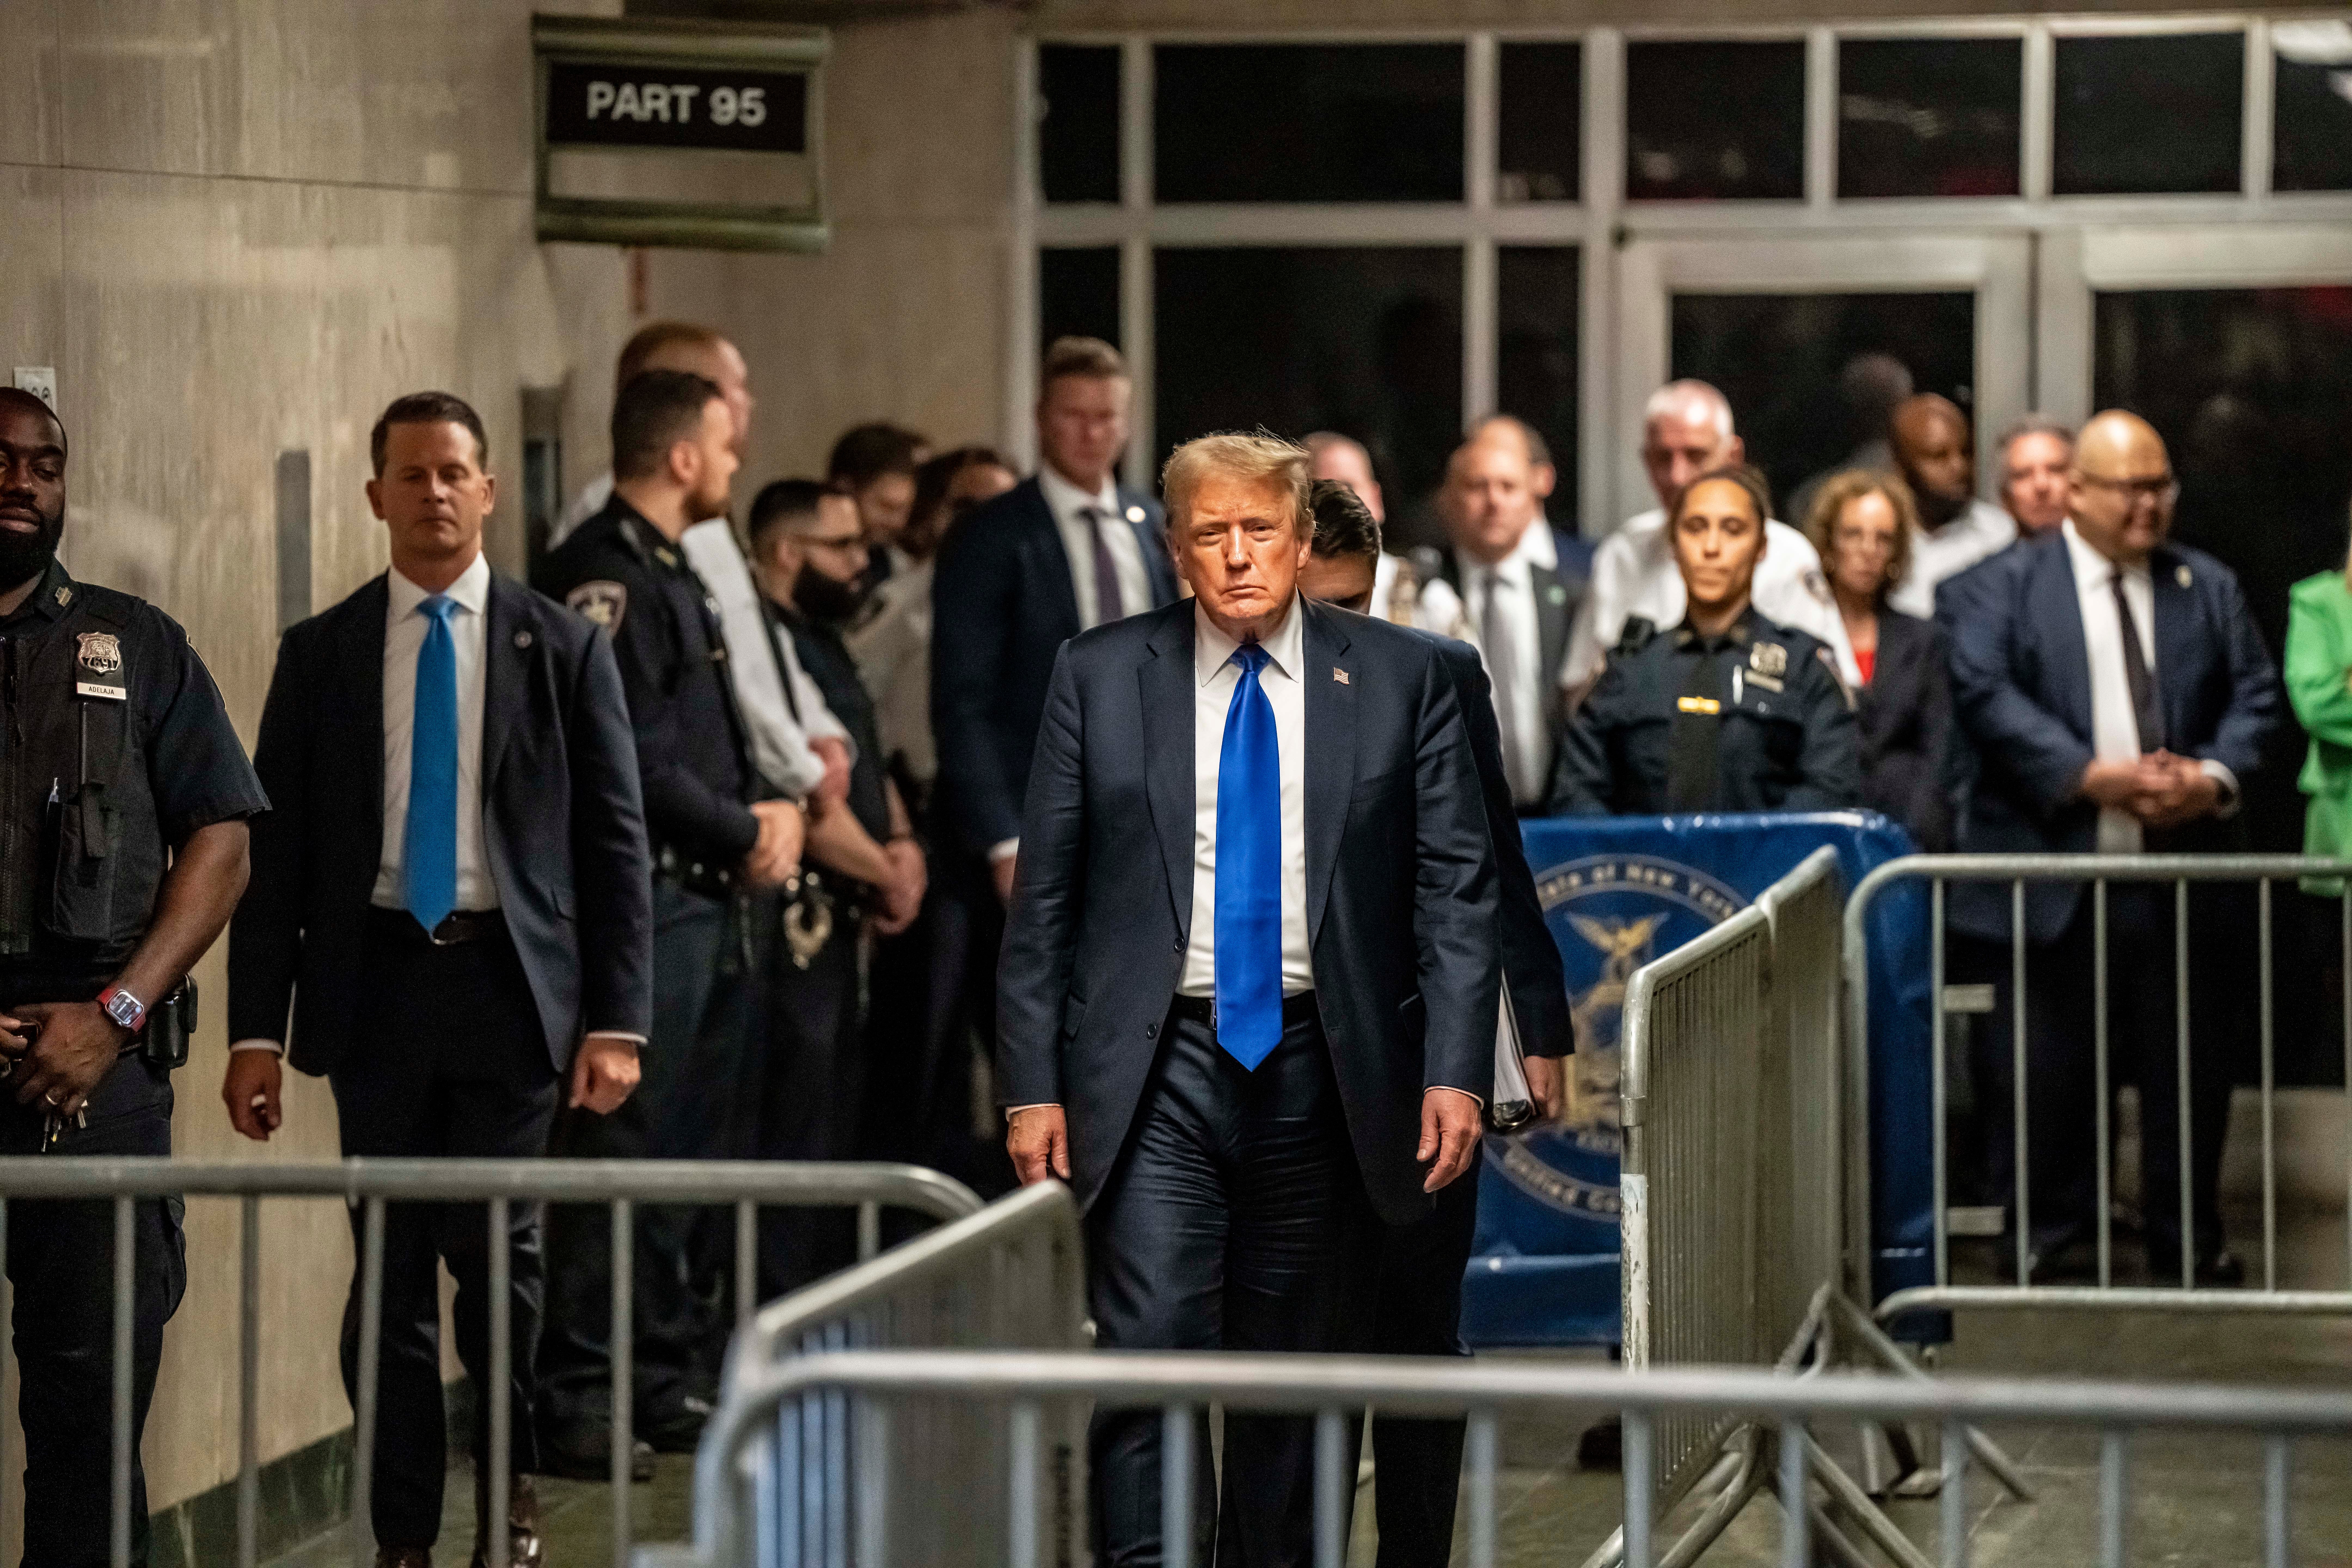 Donald Trump leaves a criminal courtroom in Manhattan after jury convicted him on 34 counts of falsifying business records